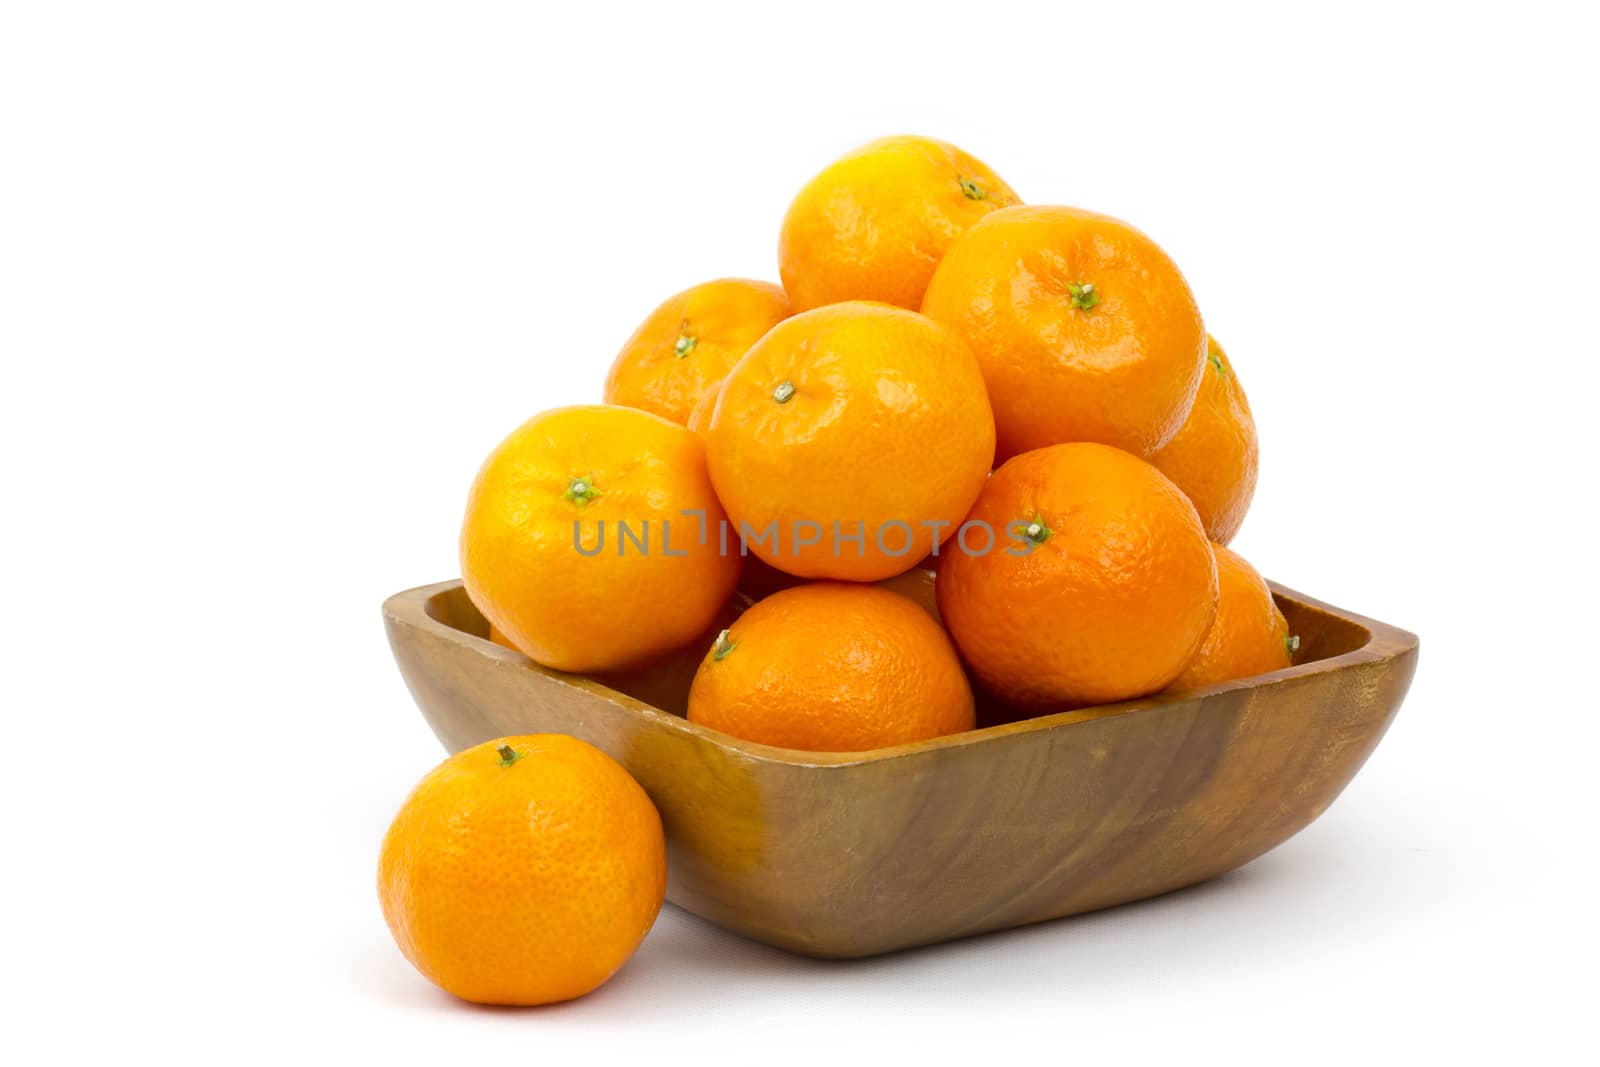 tangerines in a bowl on white background by miradrozdowski